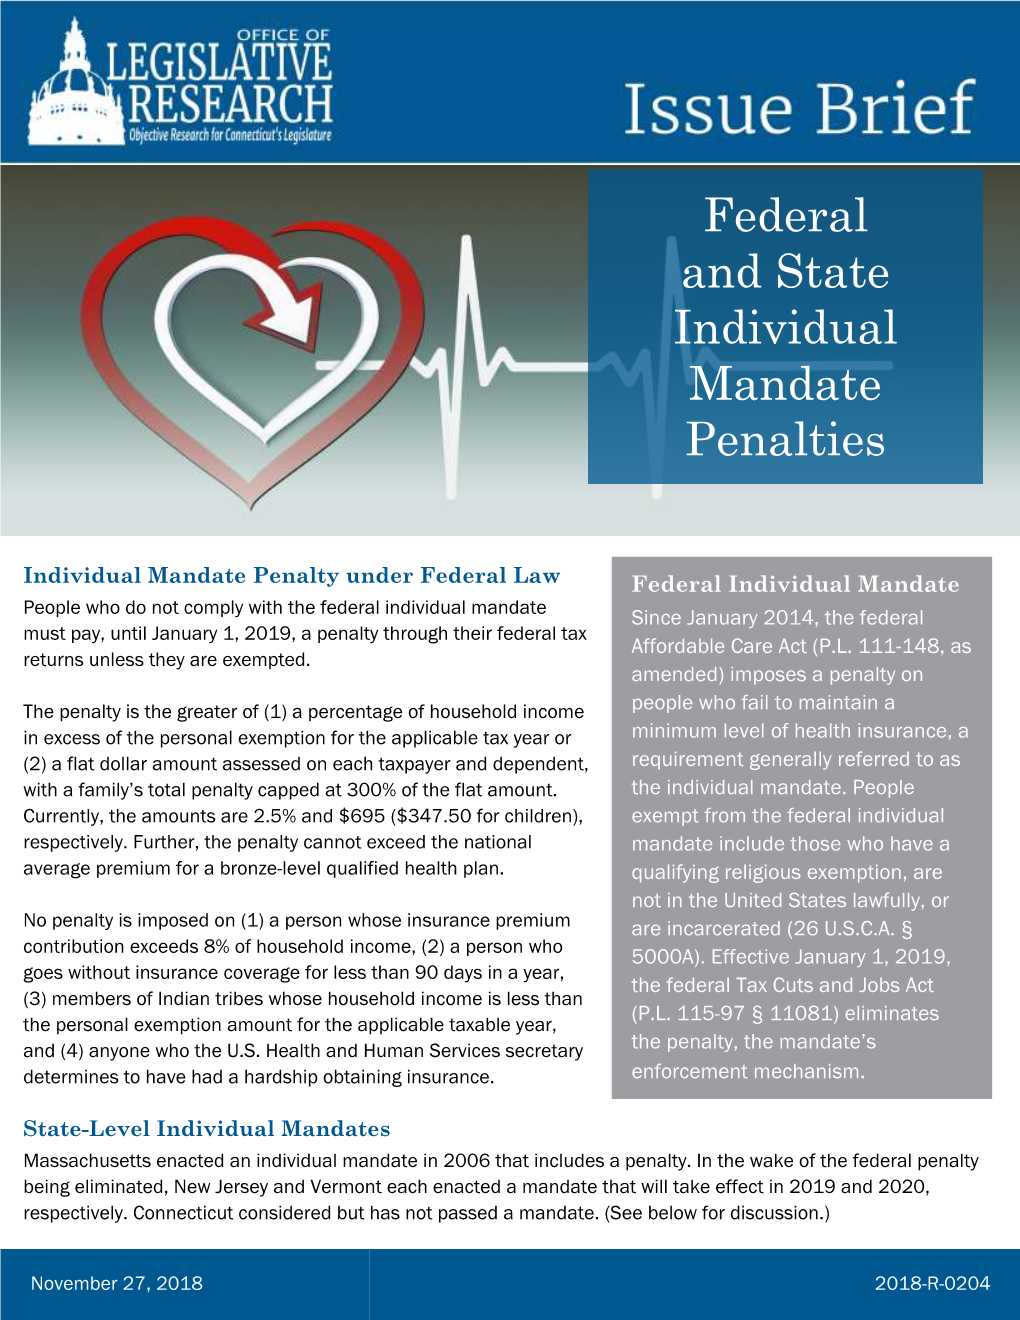 Federal and State Individual Mandate Penalties